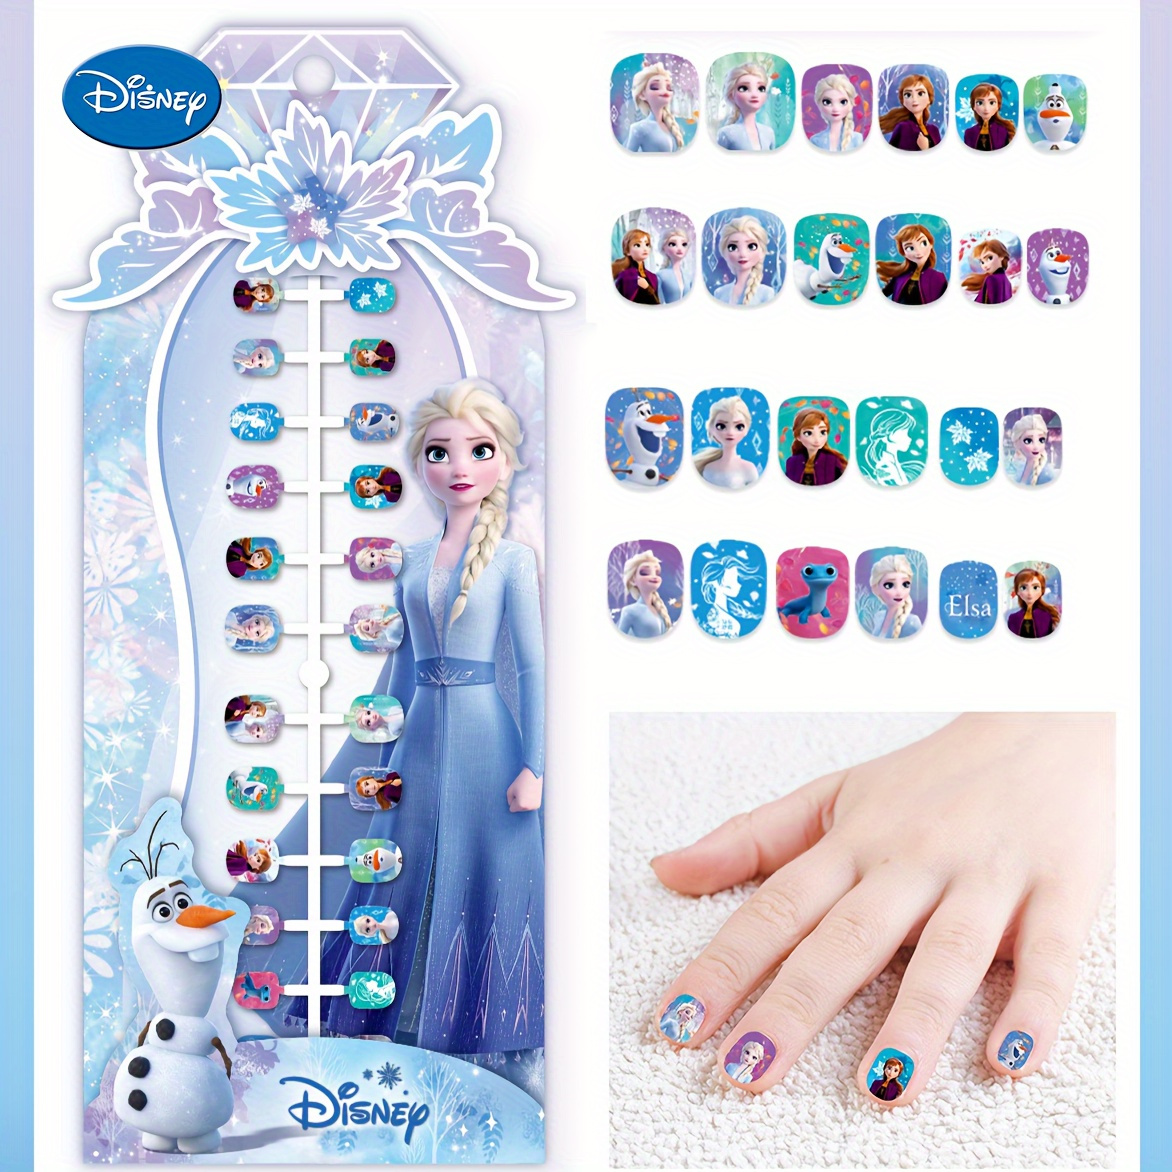 

Disney & Princess Nail Art Decals, Diy Nail Design Stickers, Rubber Material, Festive Decorations For Women And Girls